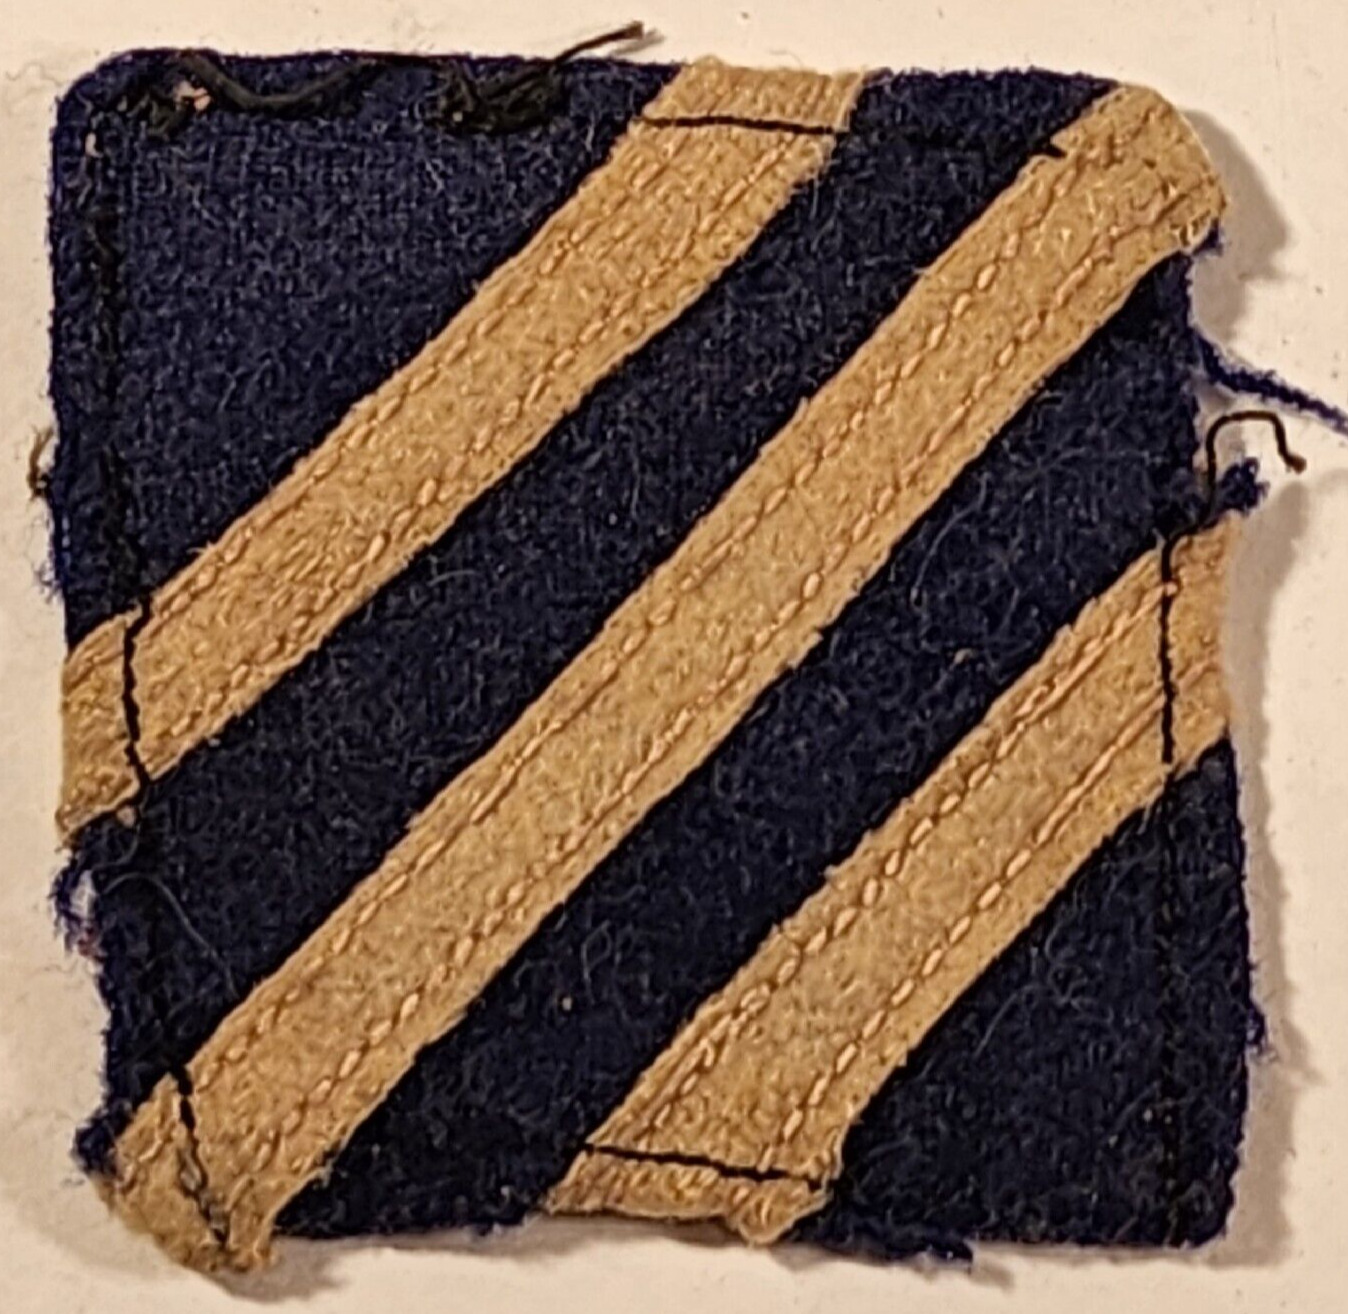 WWI U.S. ARMY 3RD DIVISION SHOULDER PATCH 2/2